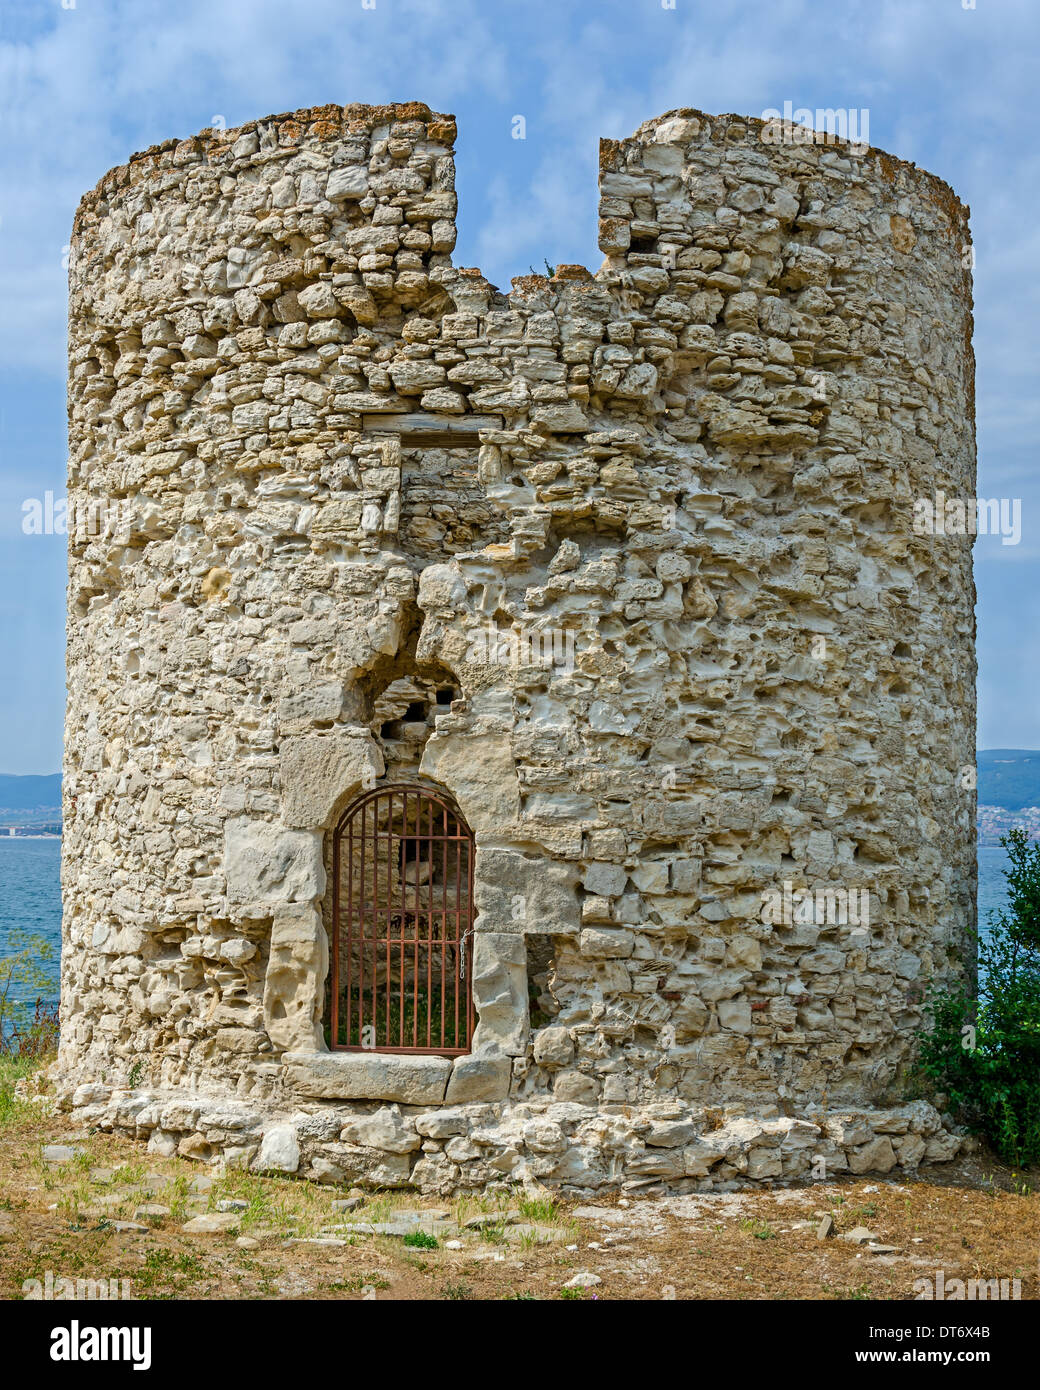 Ruins of the ancient ancient tower at seaside Nessebar, Bulgaria Stock Photo